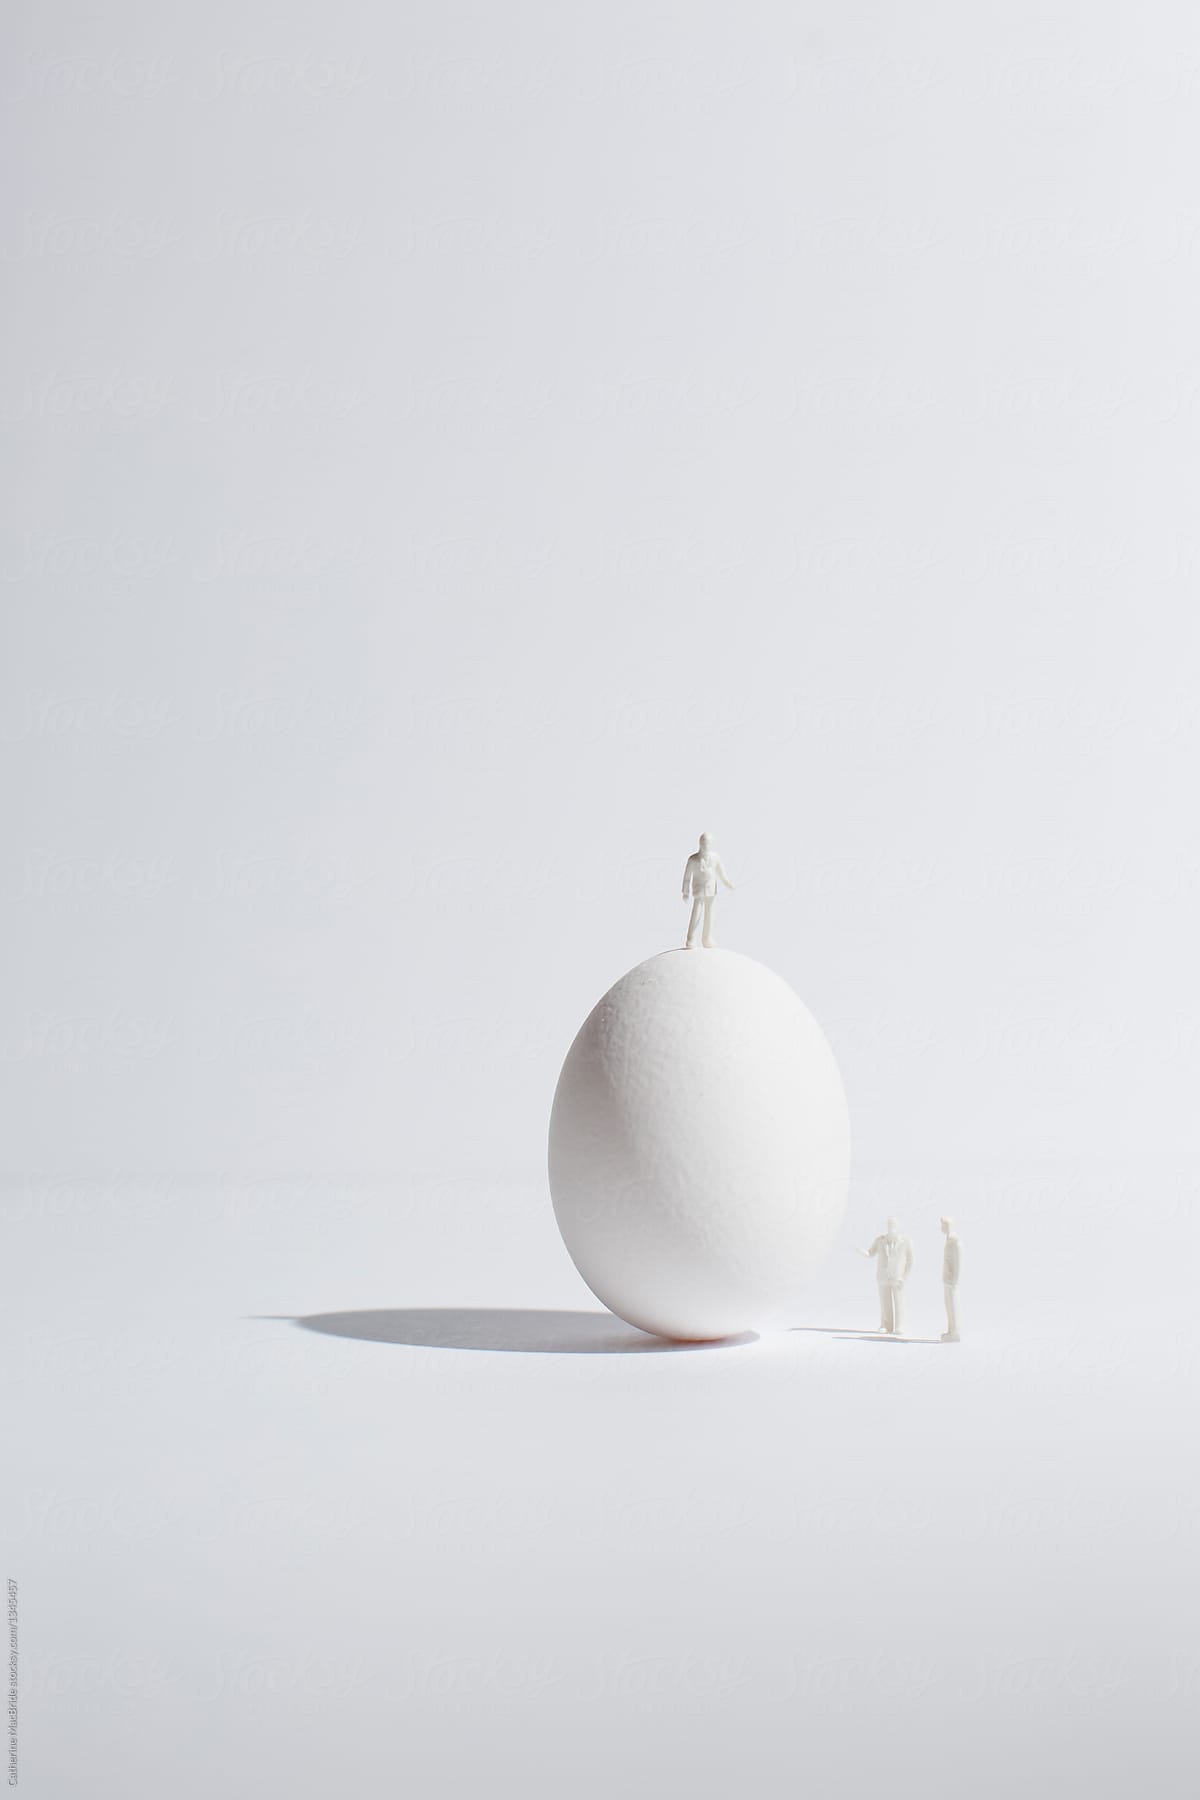 Tiny people and giant egg